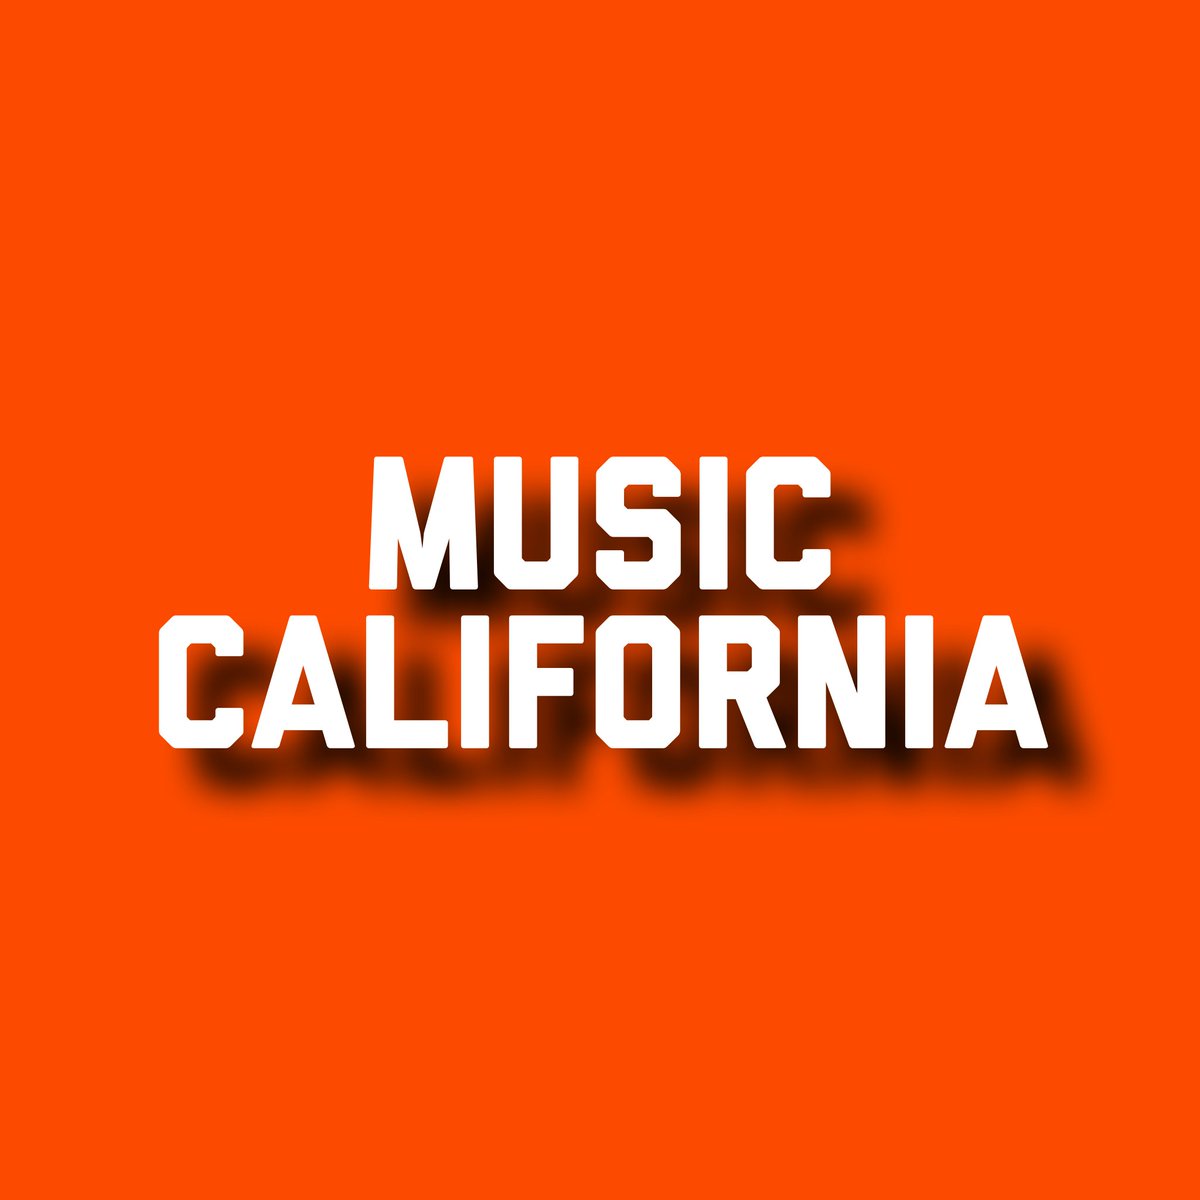 Season 2 of MUSIC CALIFORNIA from @tastetv brings a festival of award-winning West Coast, national, and international music to viewers with music videos and interviews with the artists. Check your local PBS station’s schedule. #musiccalifornia #music #musicperformance